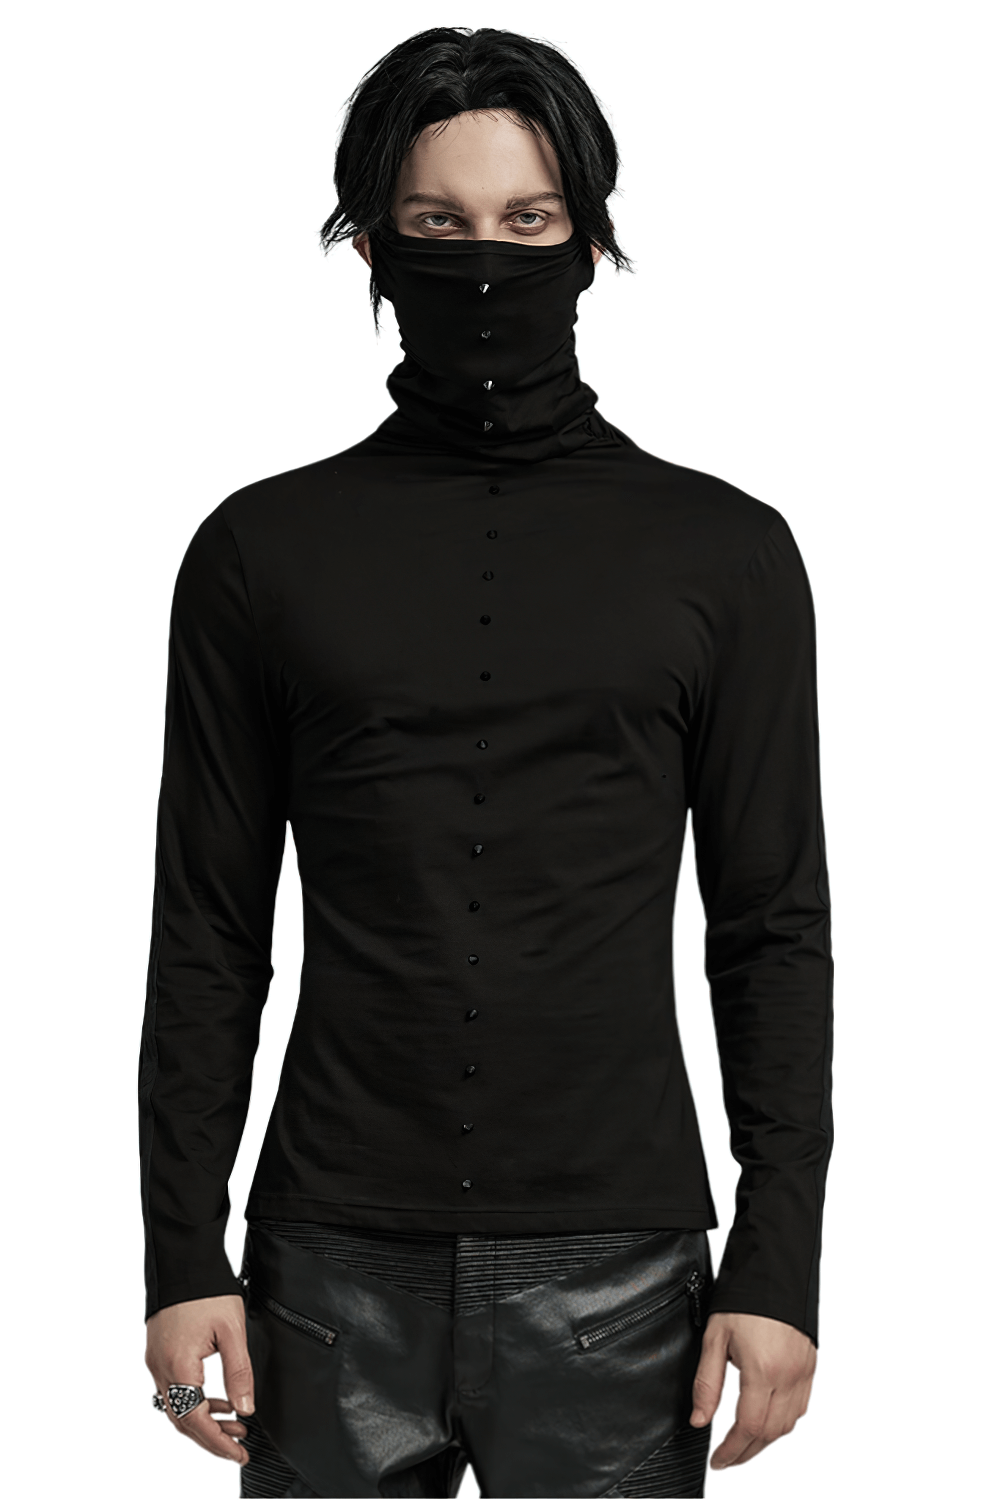 Spiked Punk High Collar Top with Ear Holes for Men